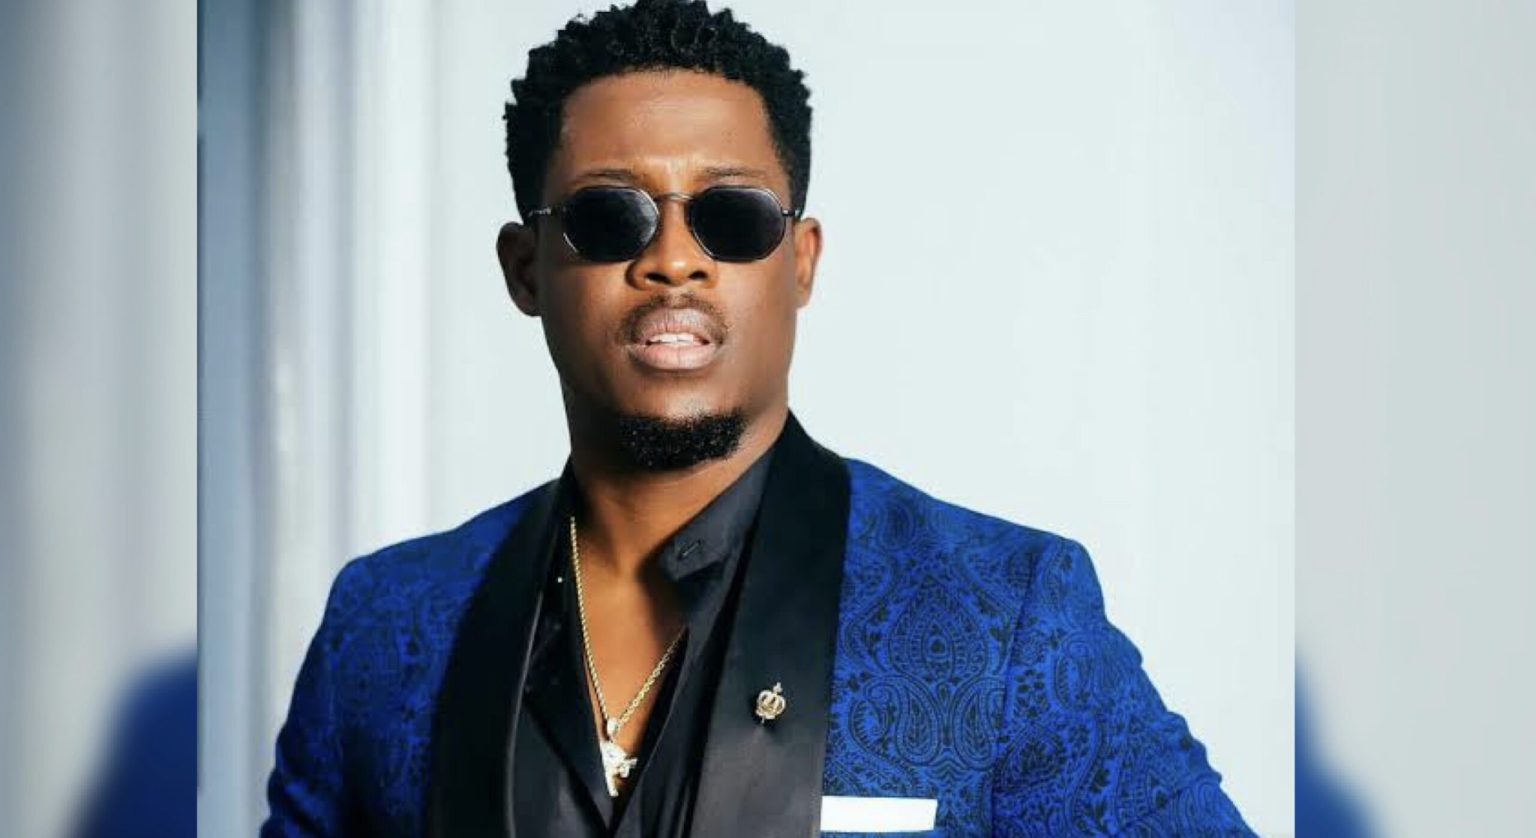 BBNaija All Stars: It was misogynistic – Seyi apologizes over people daughters comment